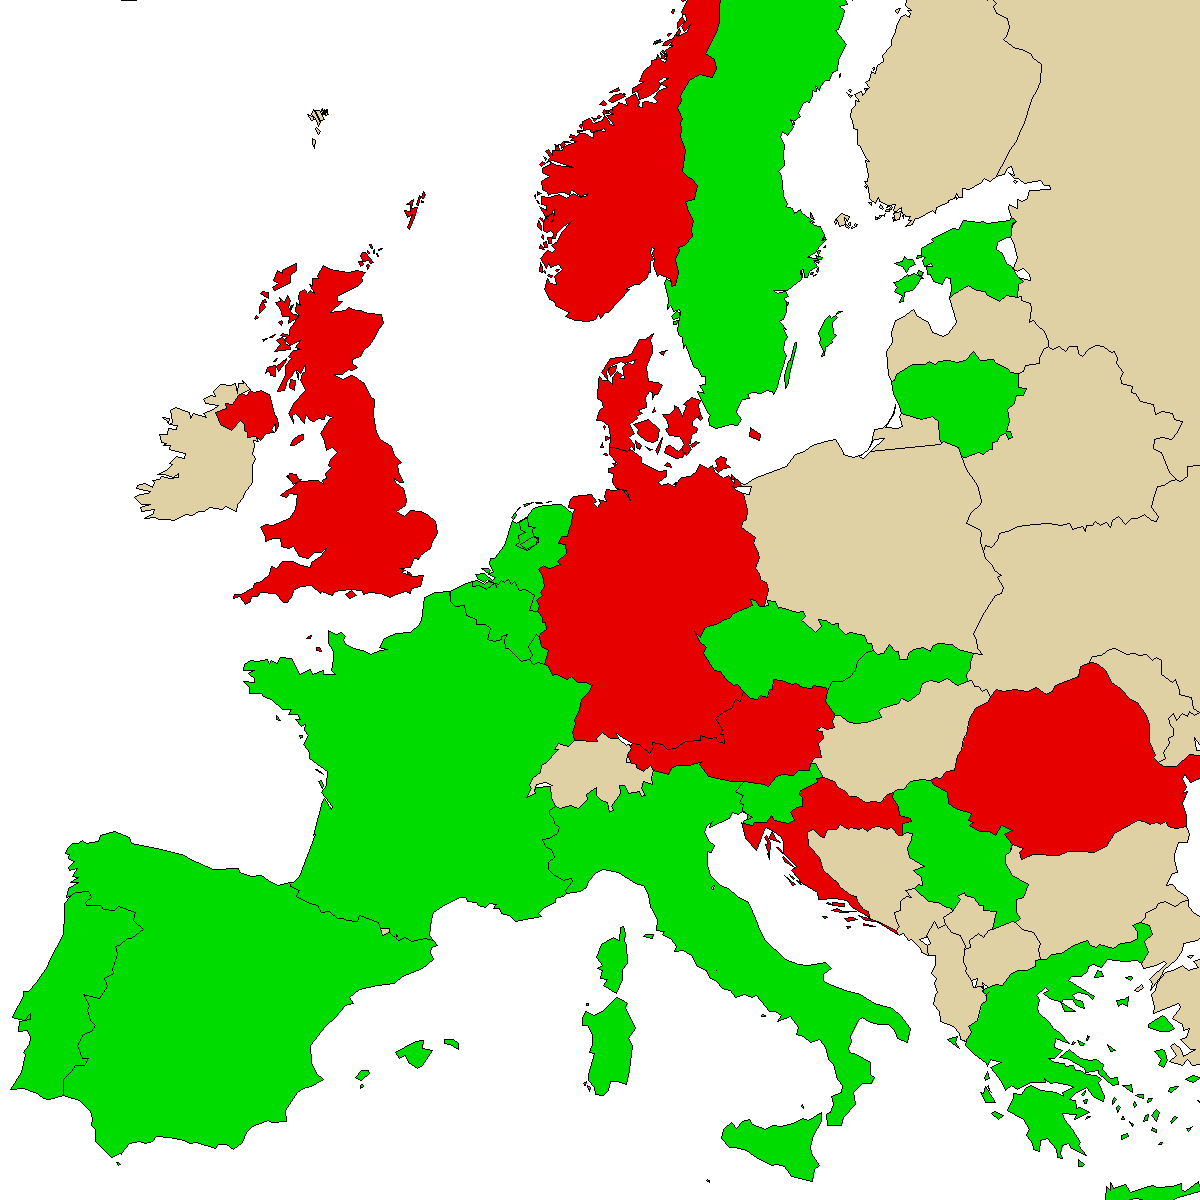 legal info map for our product 3MMA, green are countries with no ban, red with ban, gray is unknown